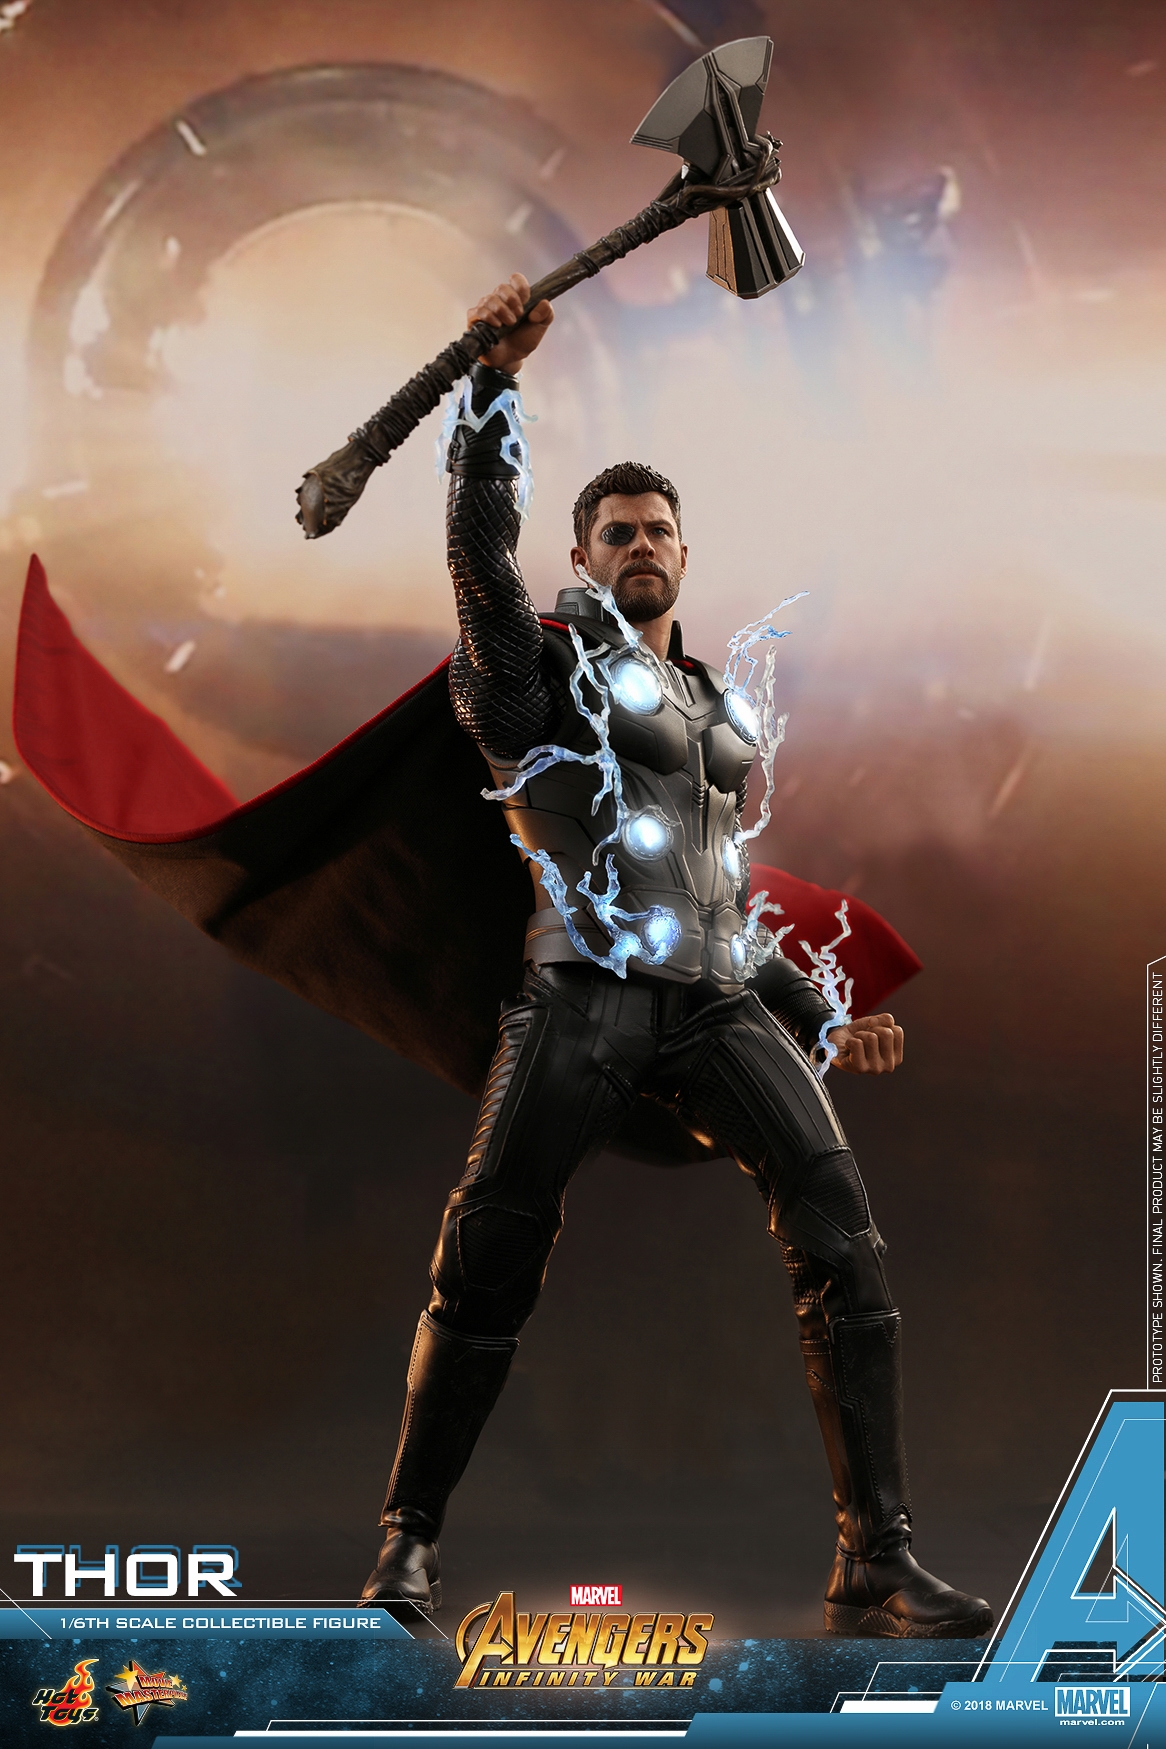 Hot-Toys-MMS474-Avengers-Infinity-War-Thor-Collectible-Figure-019.jpg